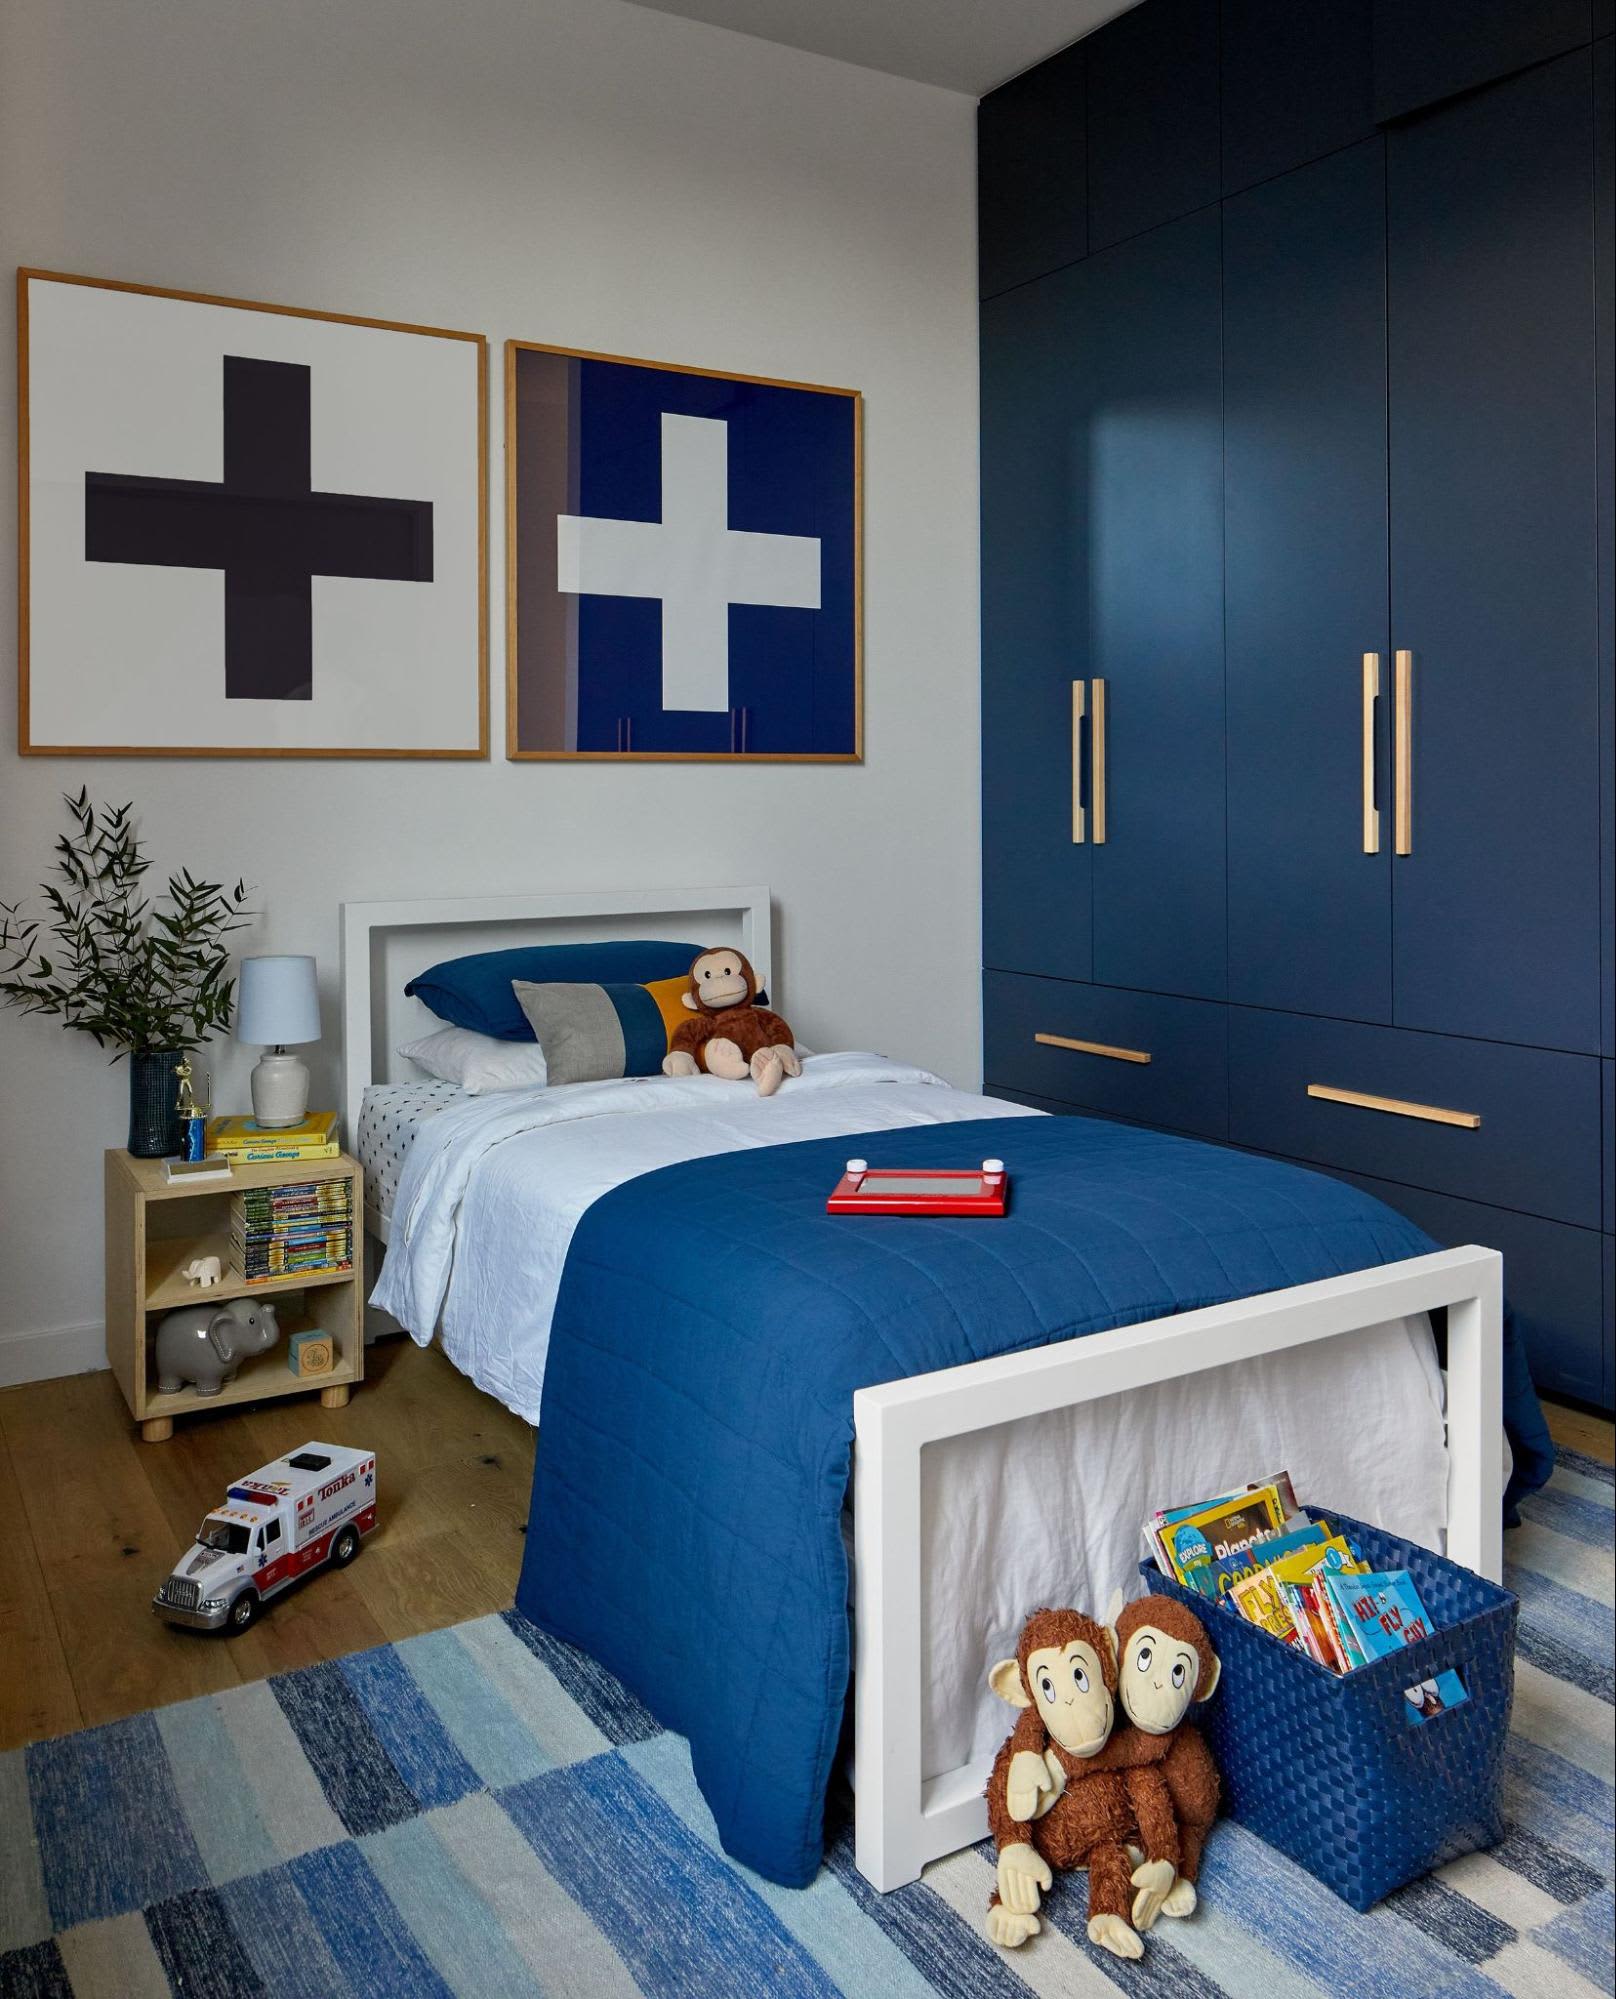 Best Types of Paint for Kids' Rooms